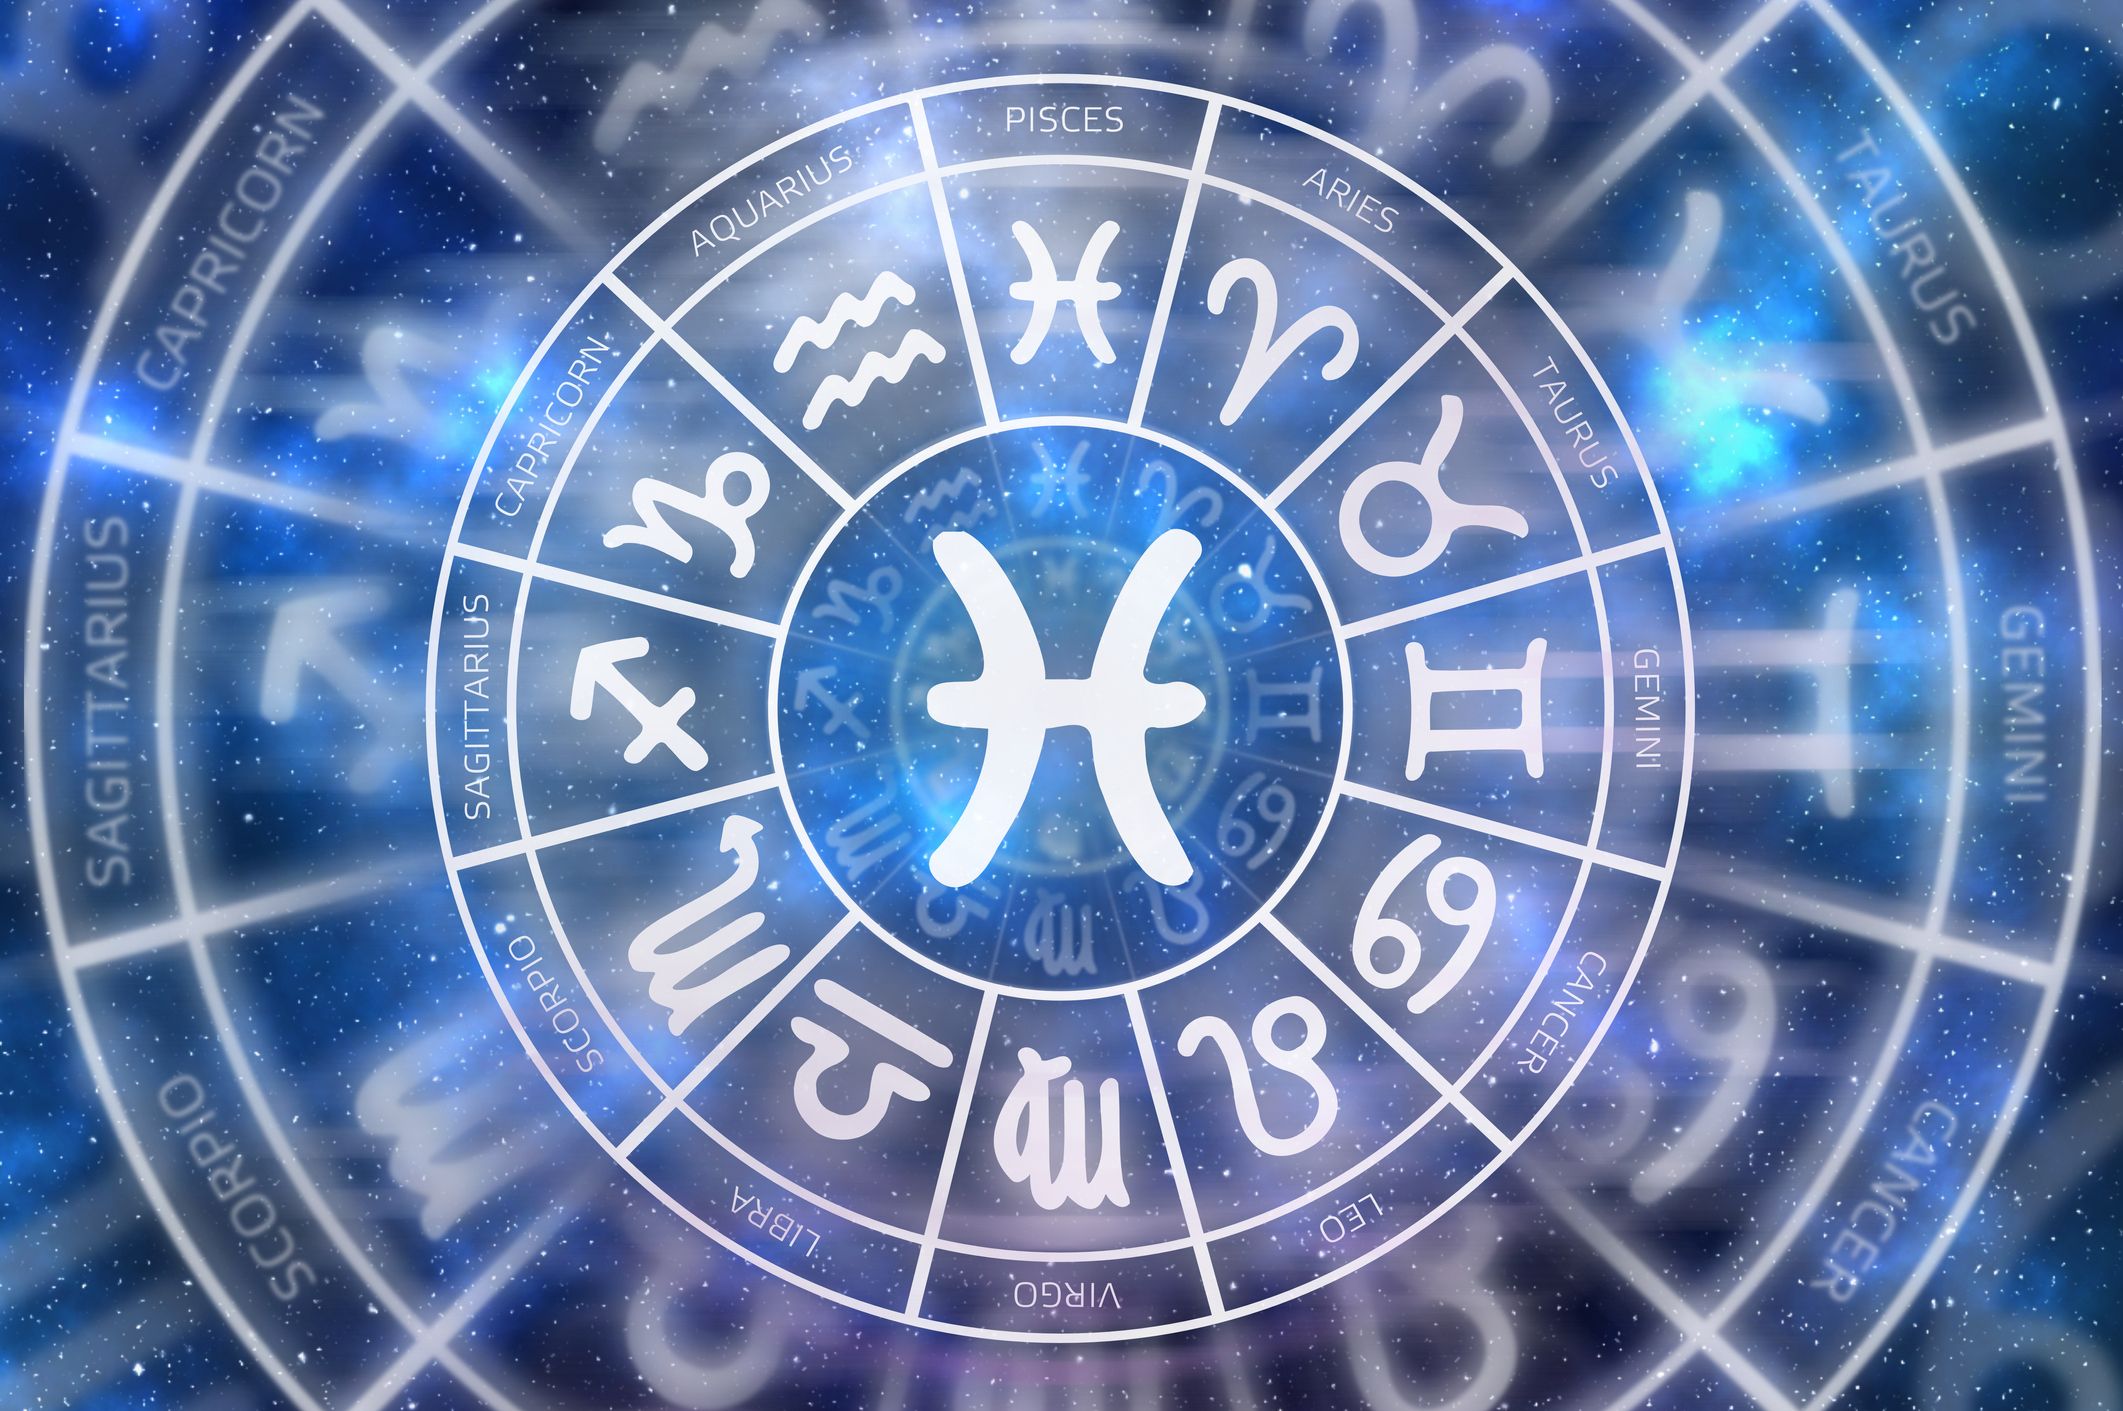 Pisces Season 2023 How It Affects Your Zodiac Sign In February